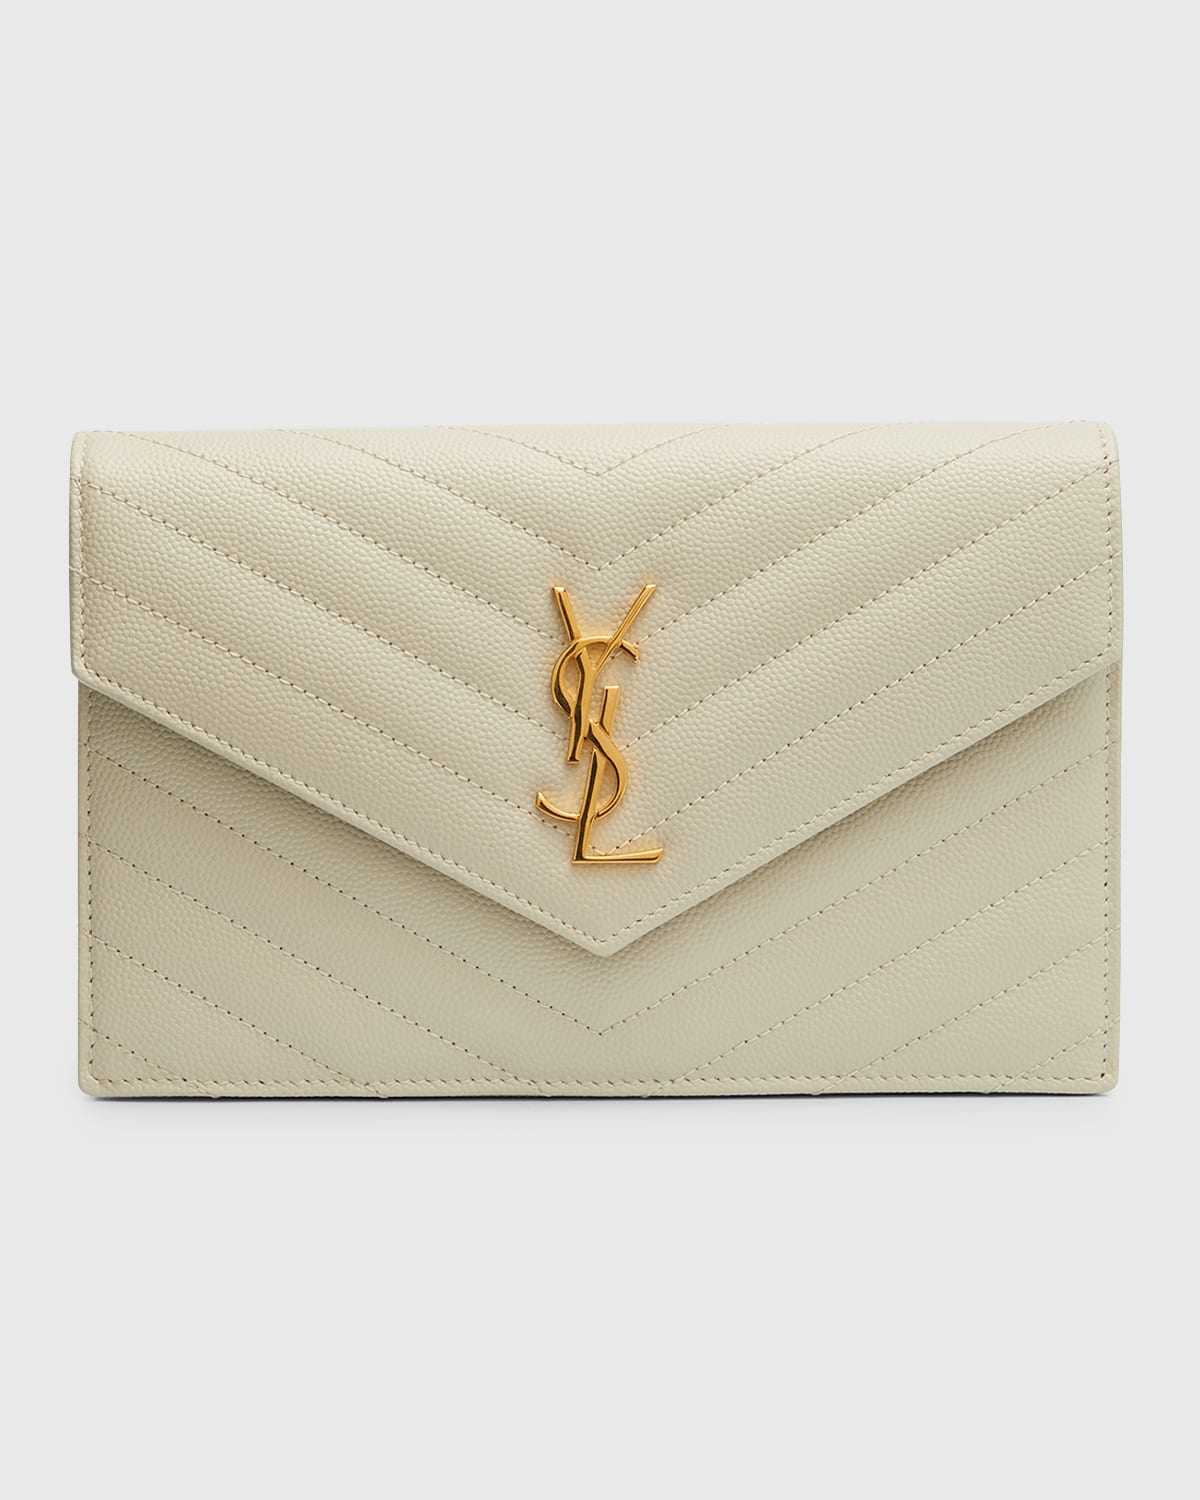 Saint Laurent Small Ysl Envelope Flap Wallet On Chain In Crema Soft